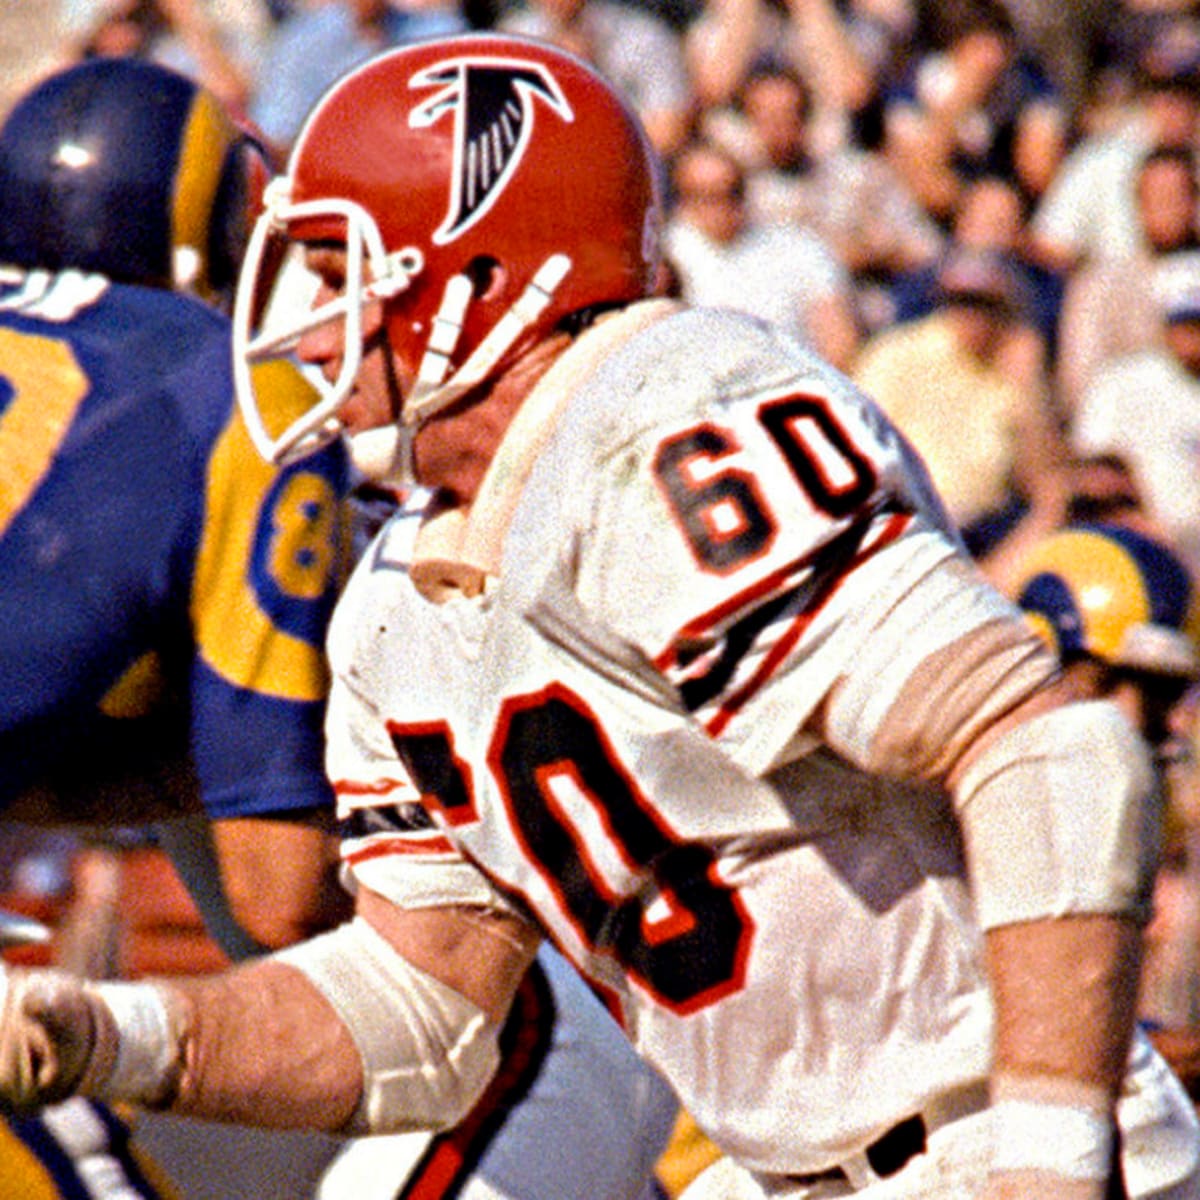 Mr. Falcon' Tommy Nobis dies at 74